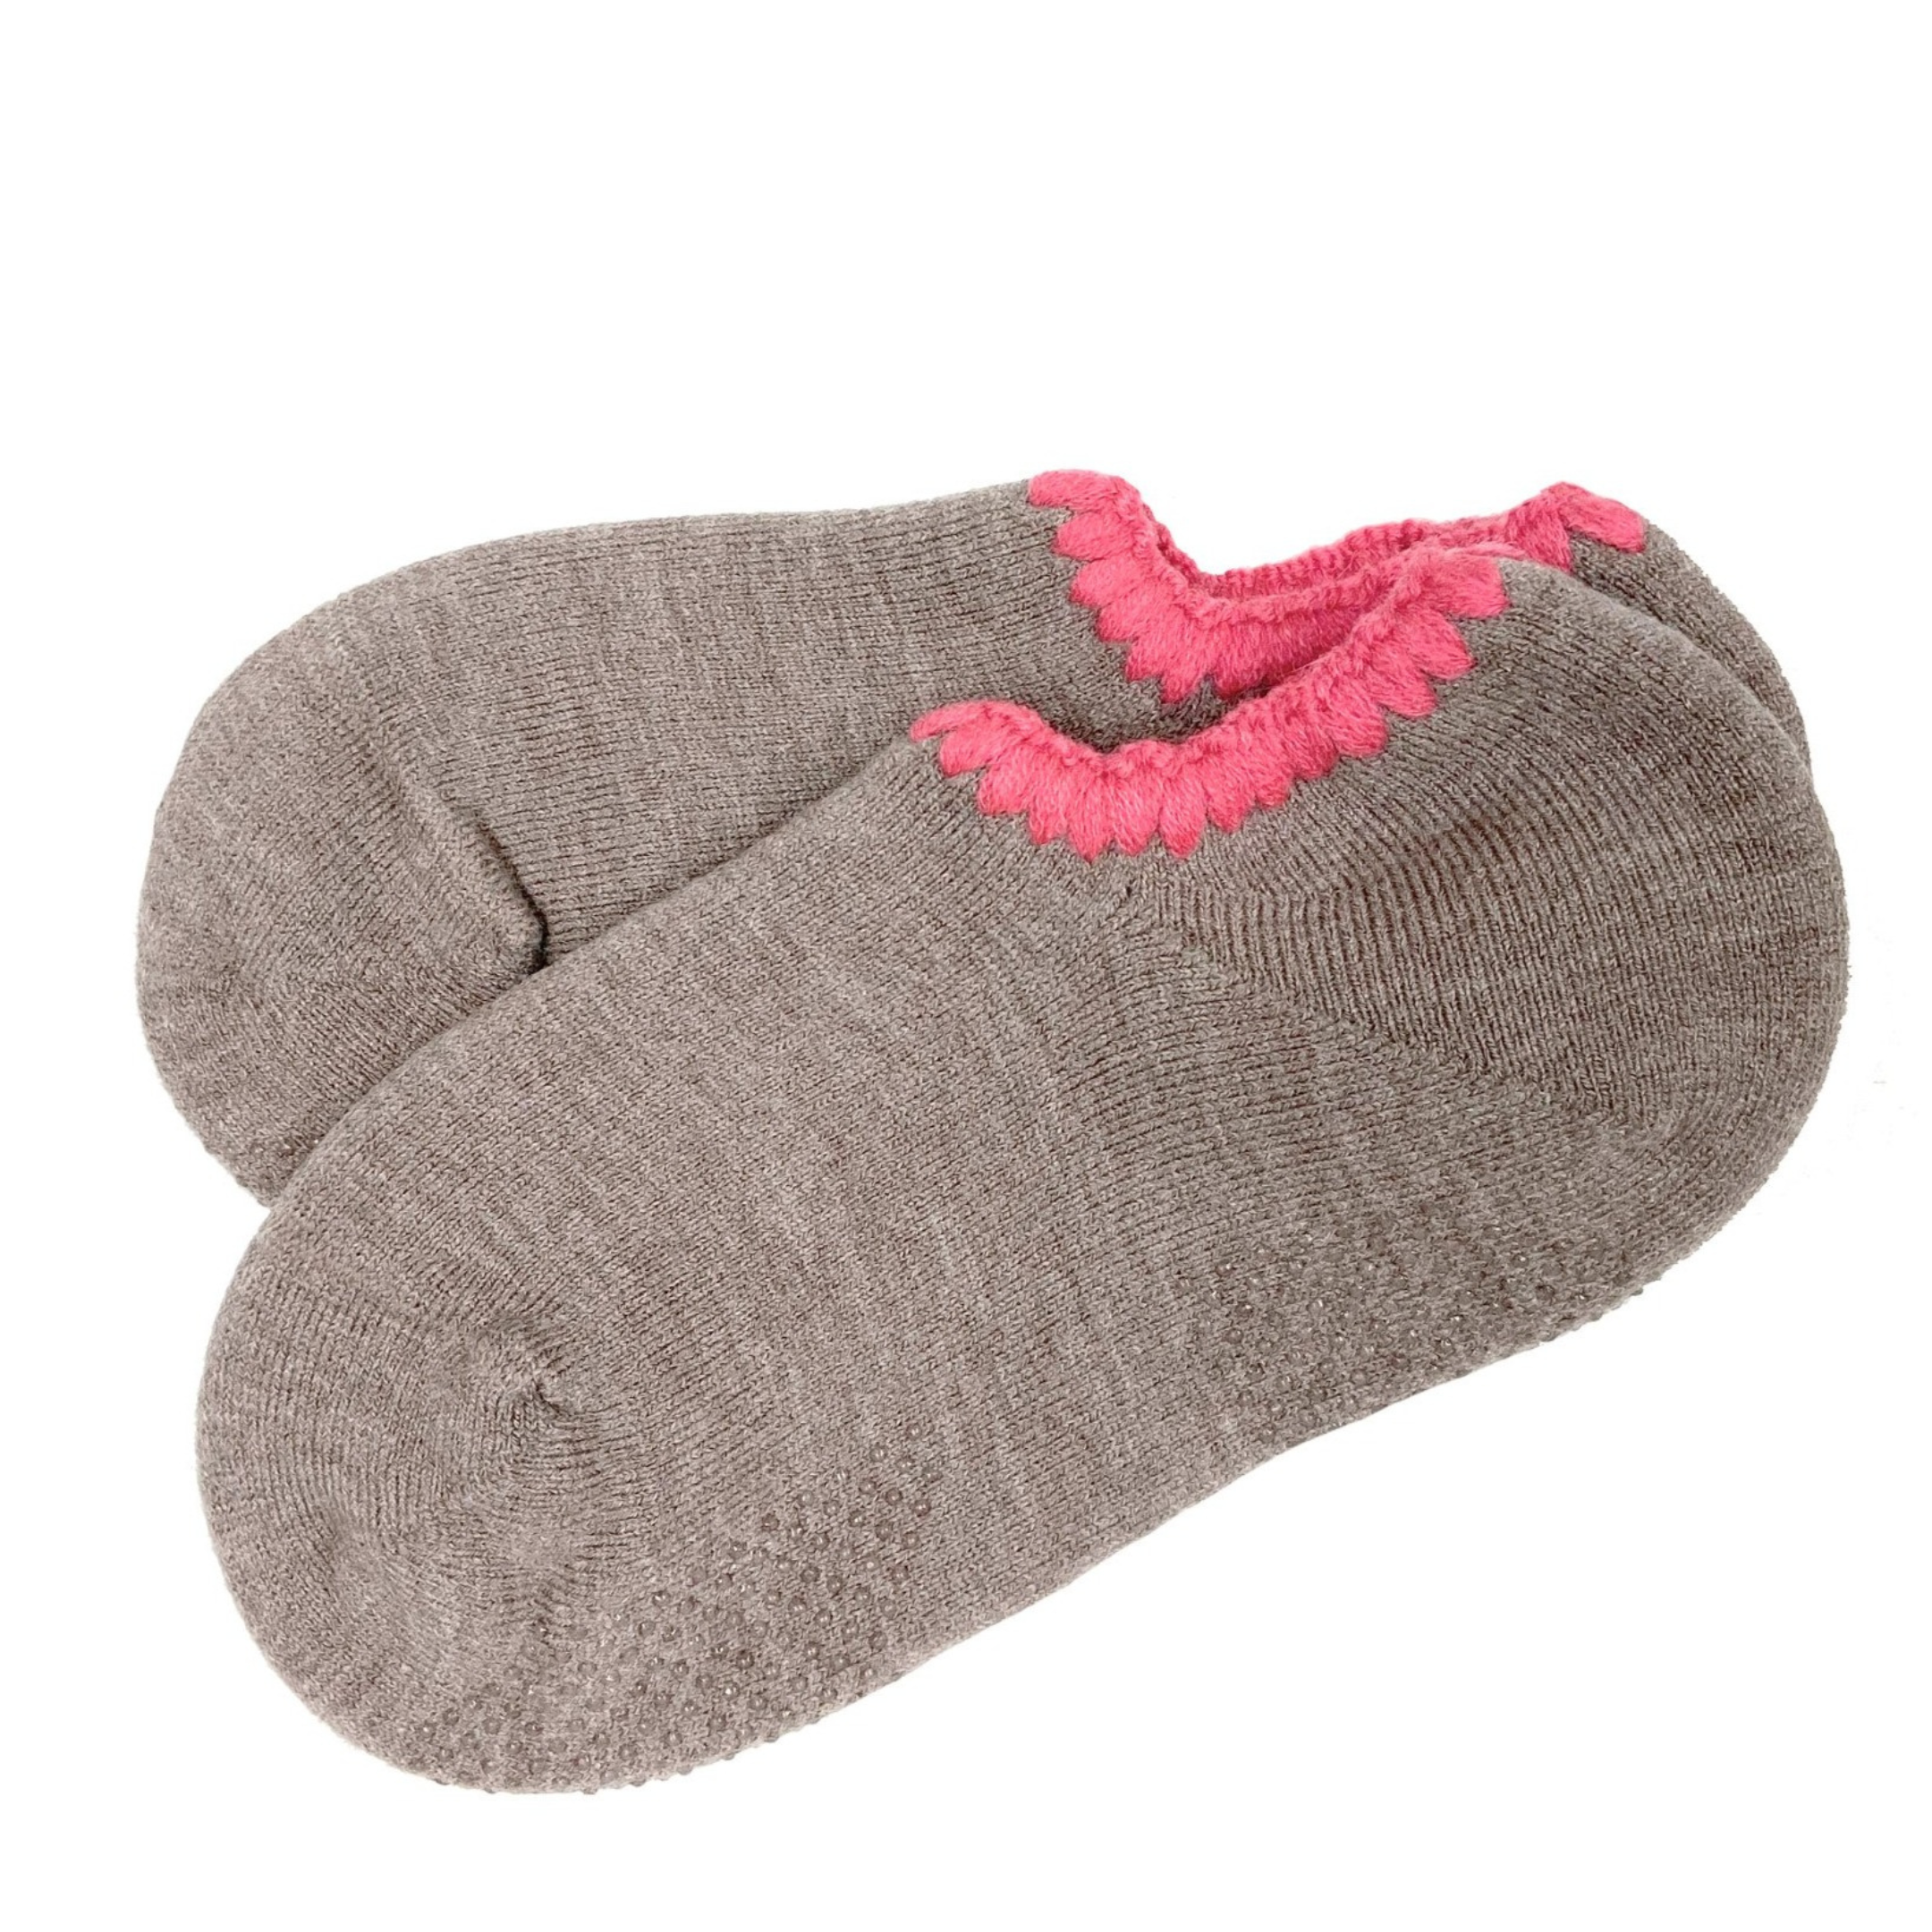 Handcrafted Wool Slipper Socks | With Grips | Medium | 8 Colors - CHERRYSTONEstyle